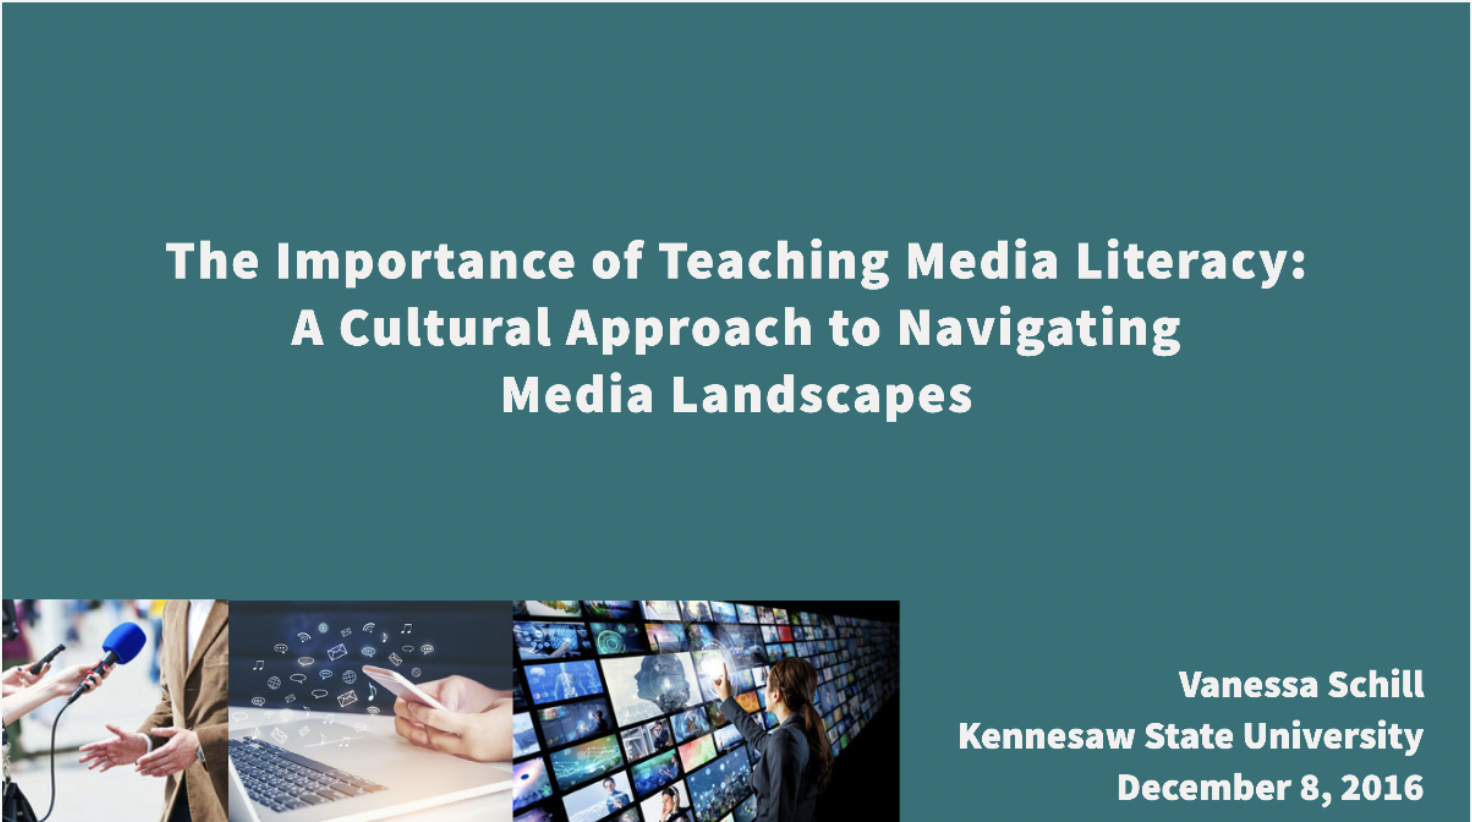 The Importance of Teaching Media Literacy